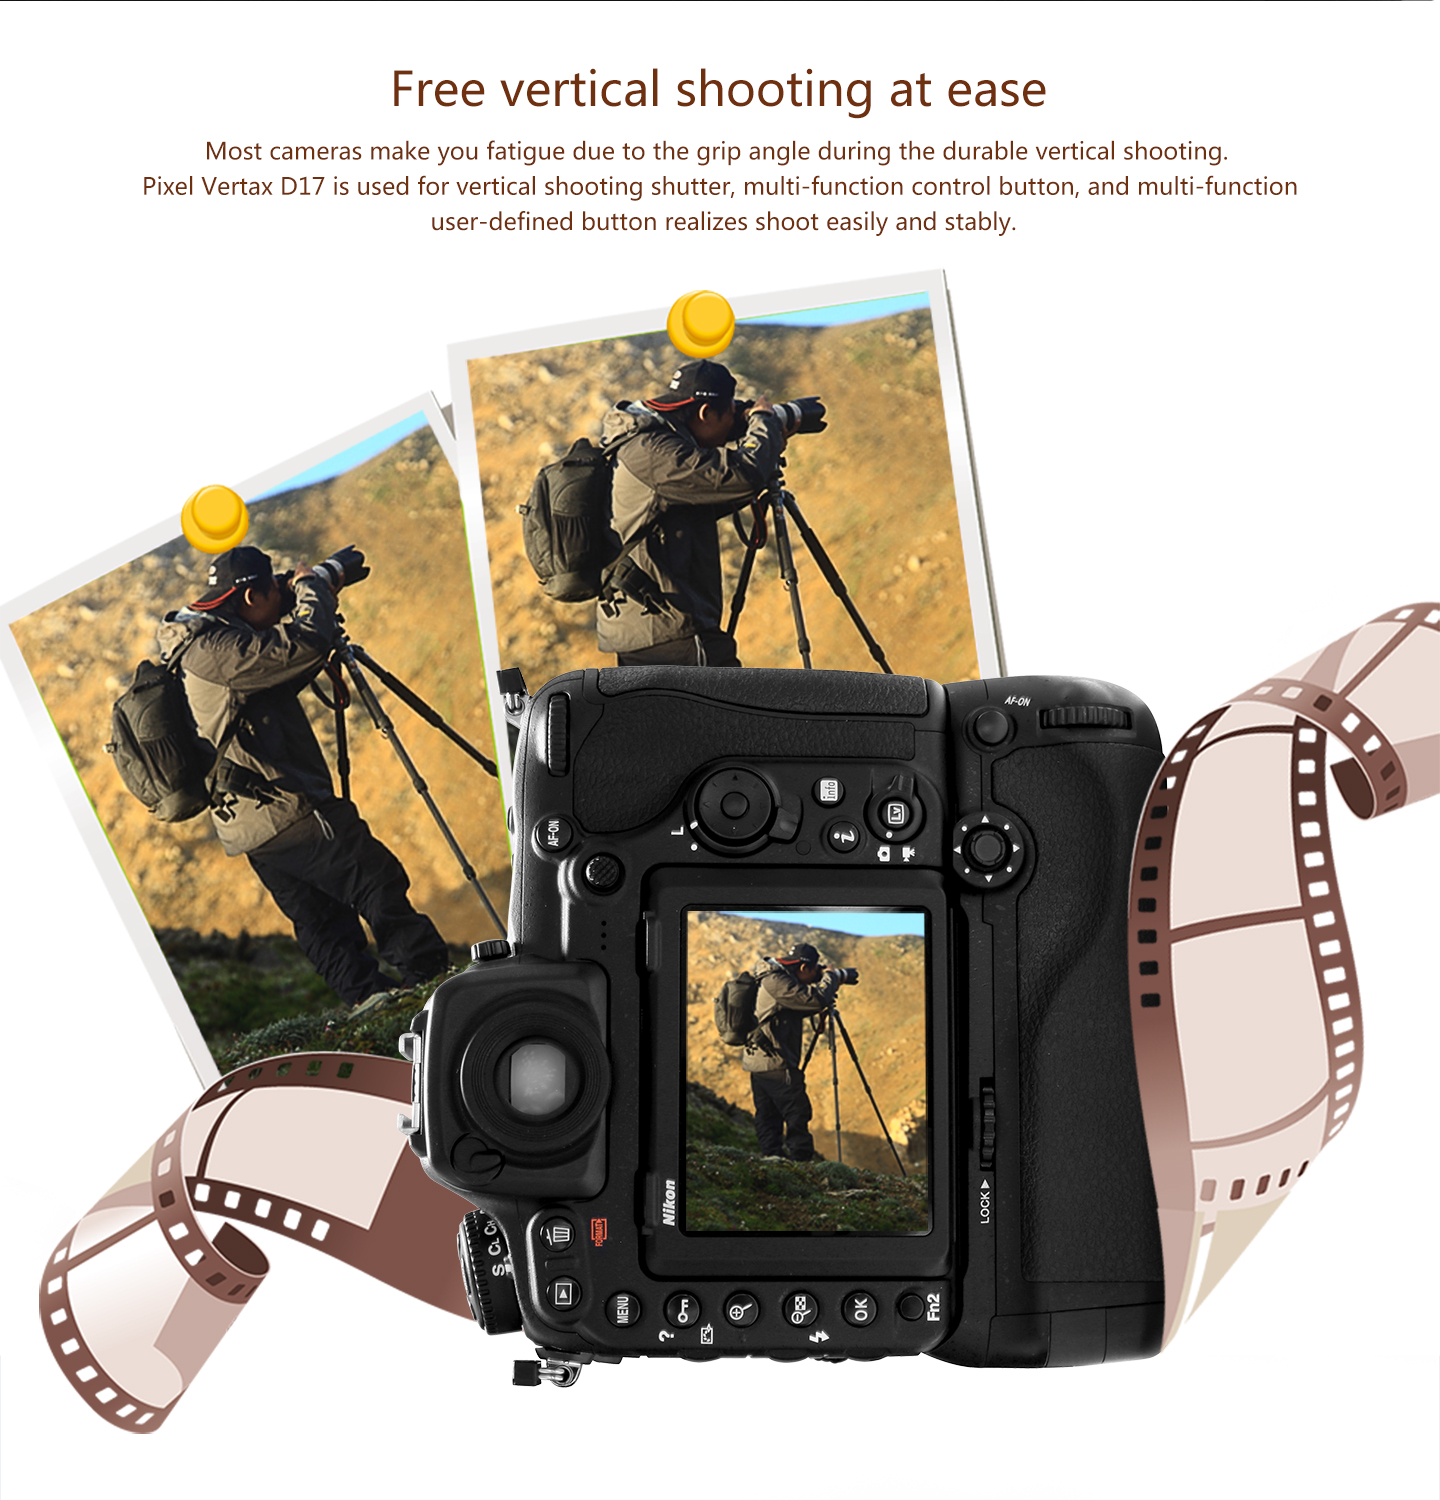 Free vertical shooting at ease